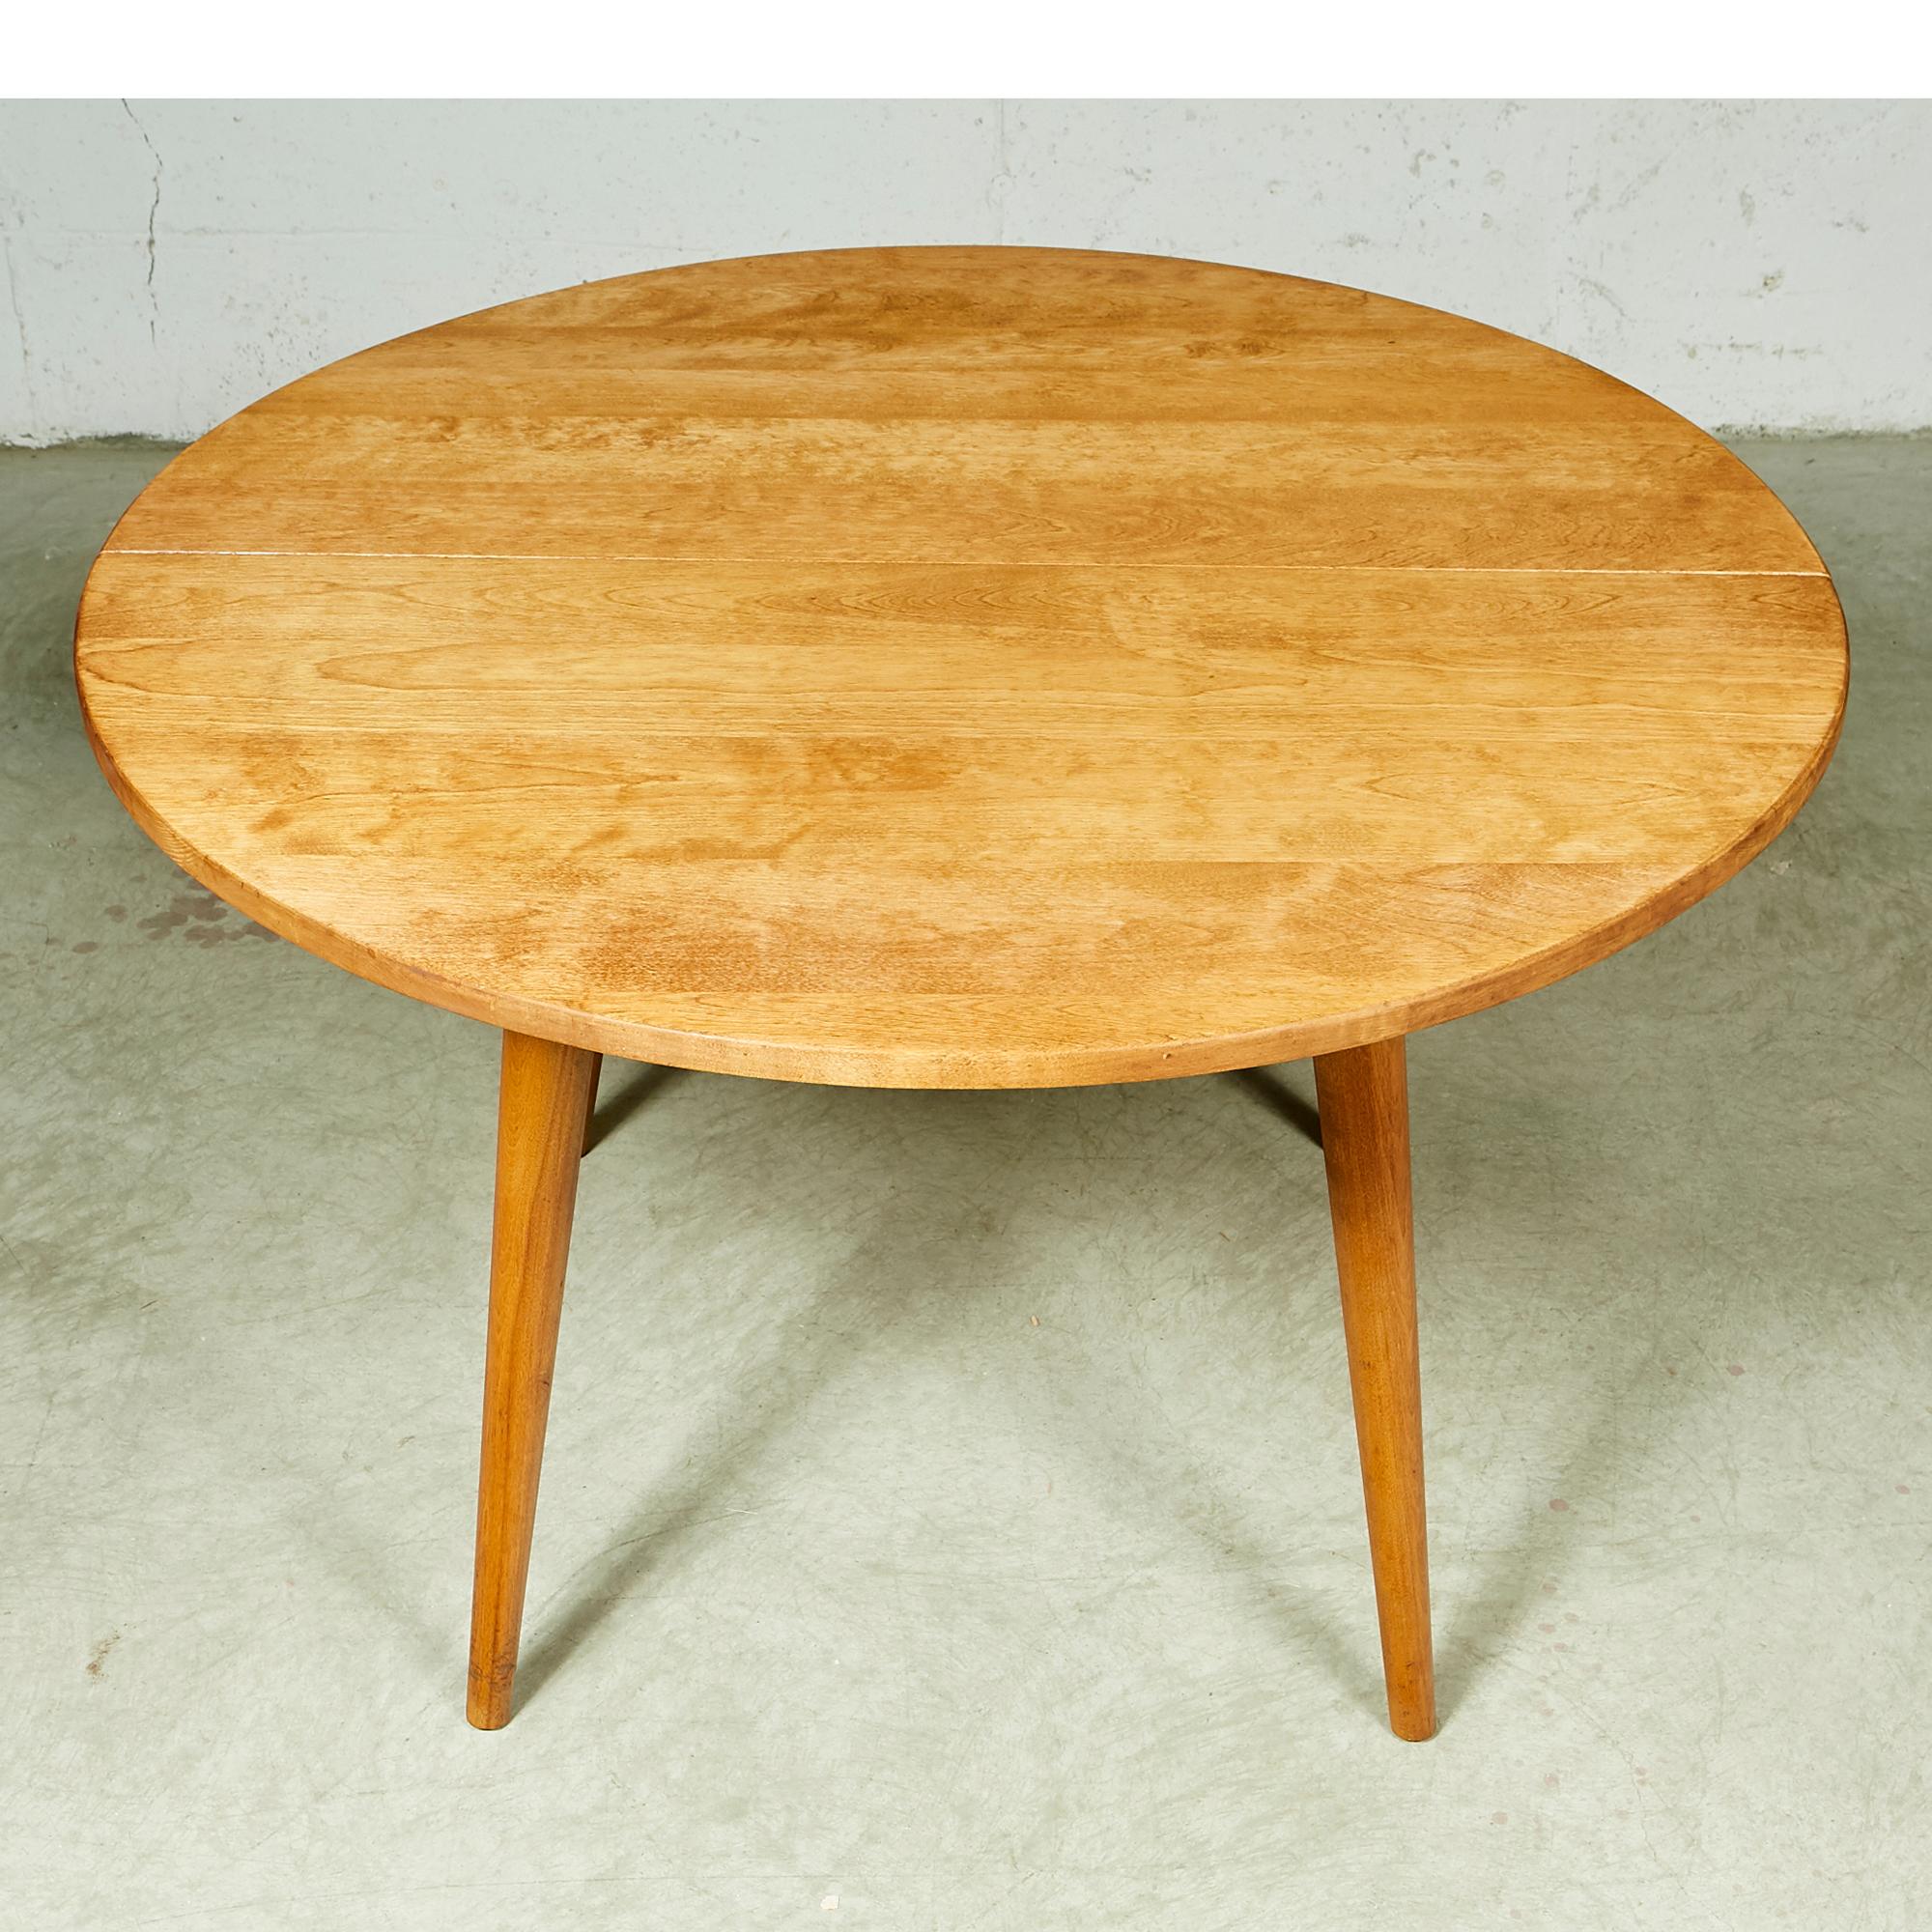 Vintage round maple wood dining table in newly refinished condition with round legs. No maker's mark.